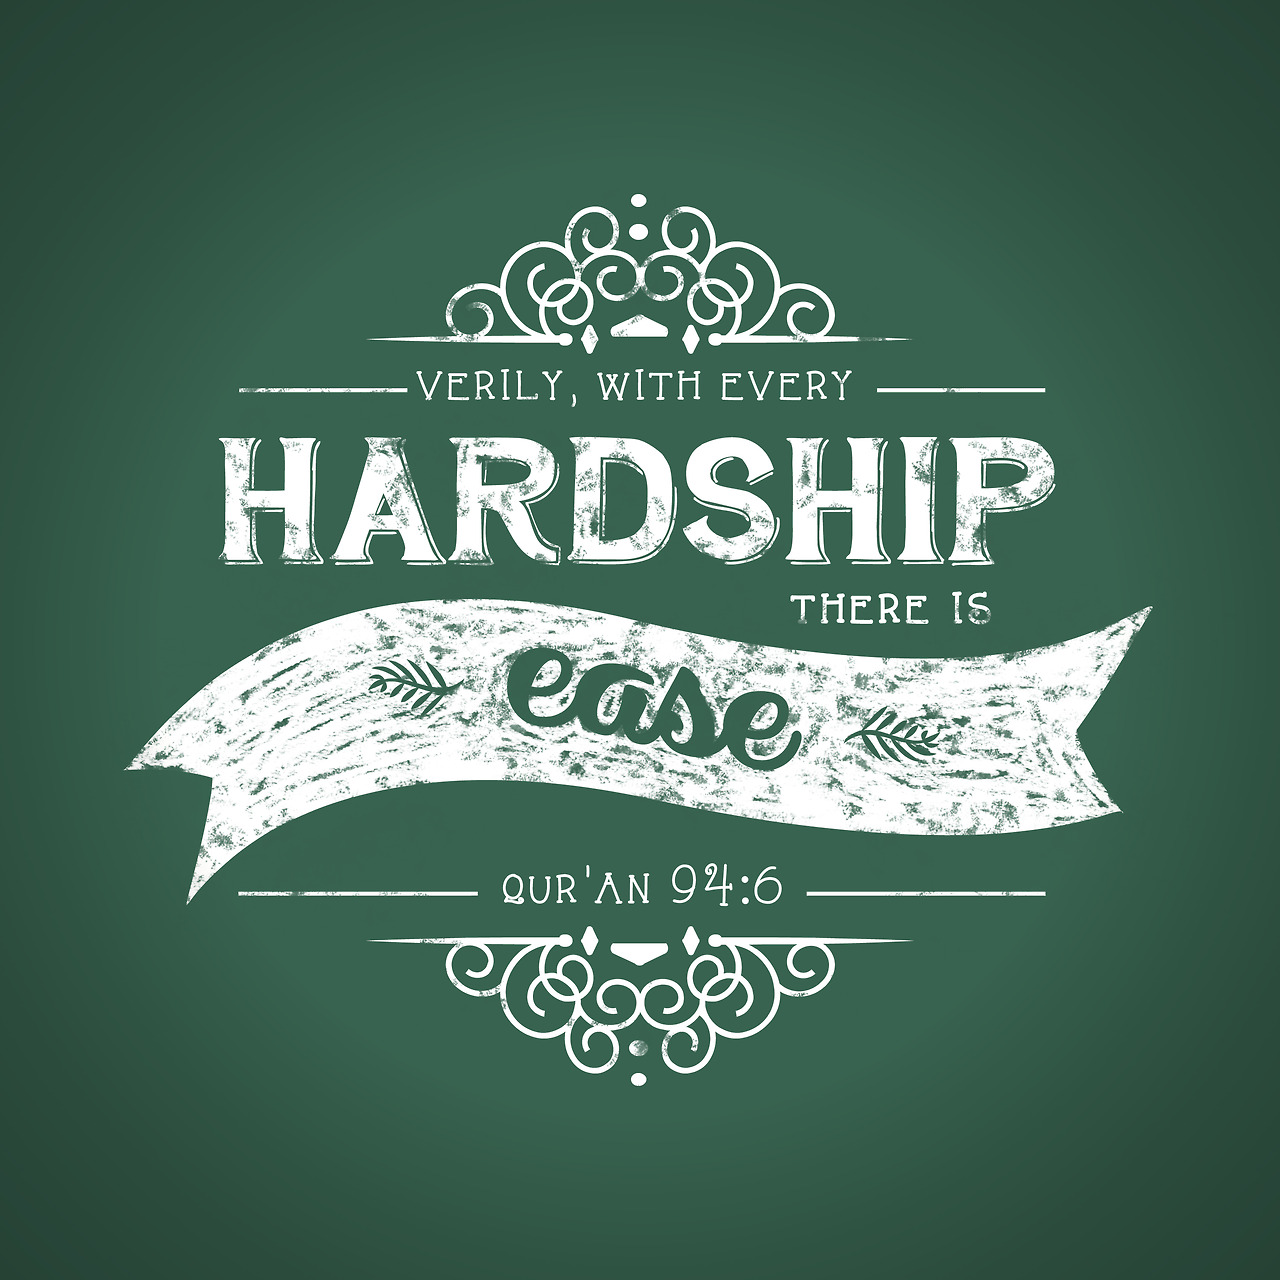 Verily, with every hardship comes ease